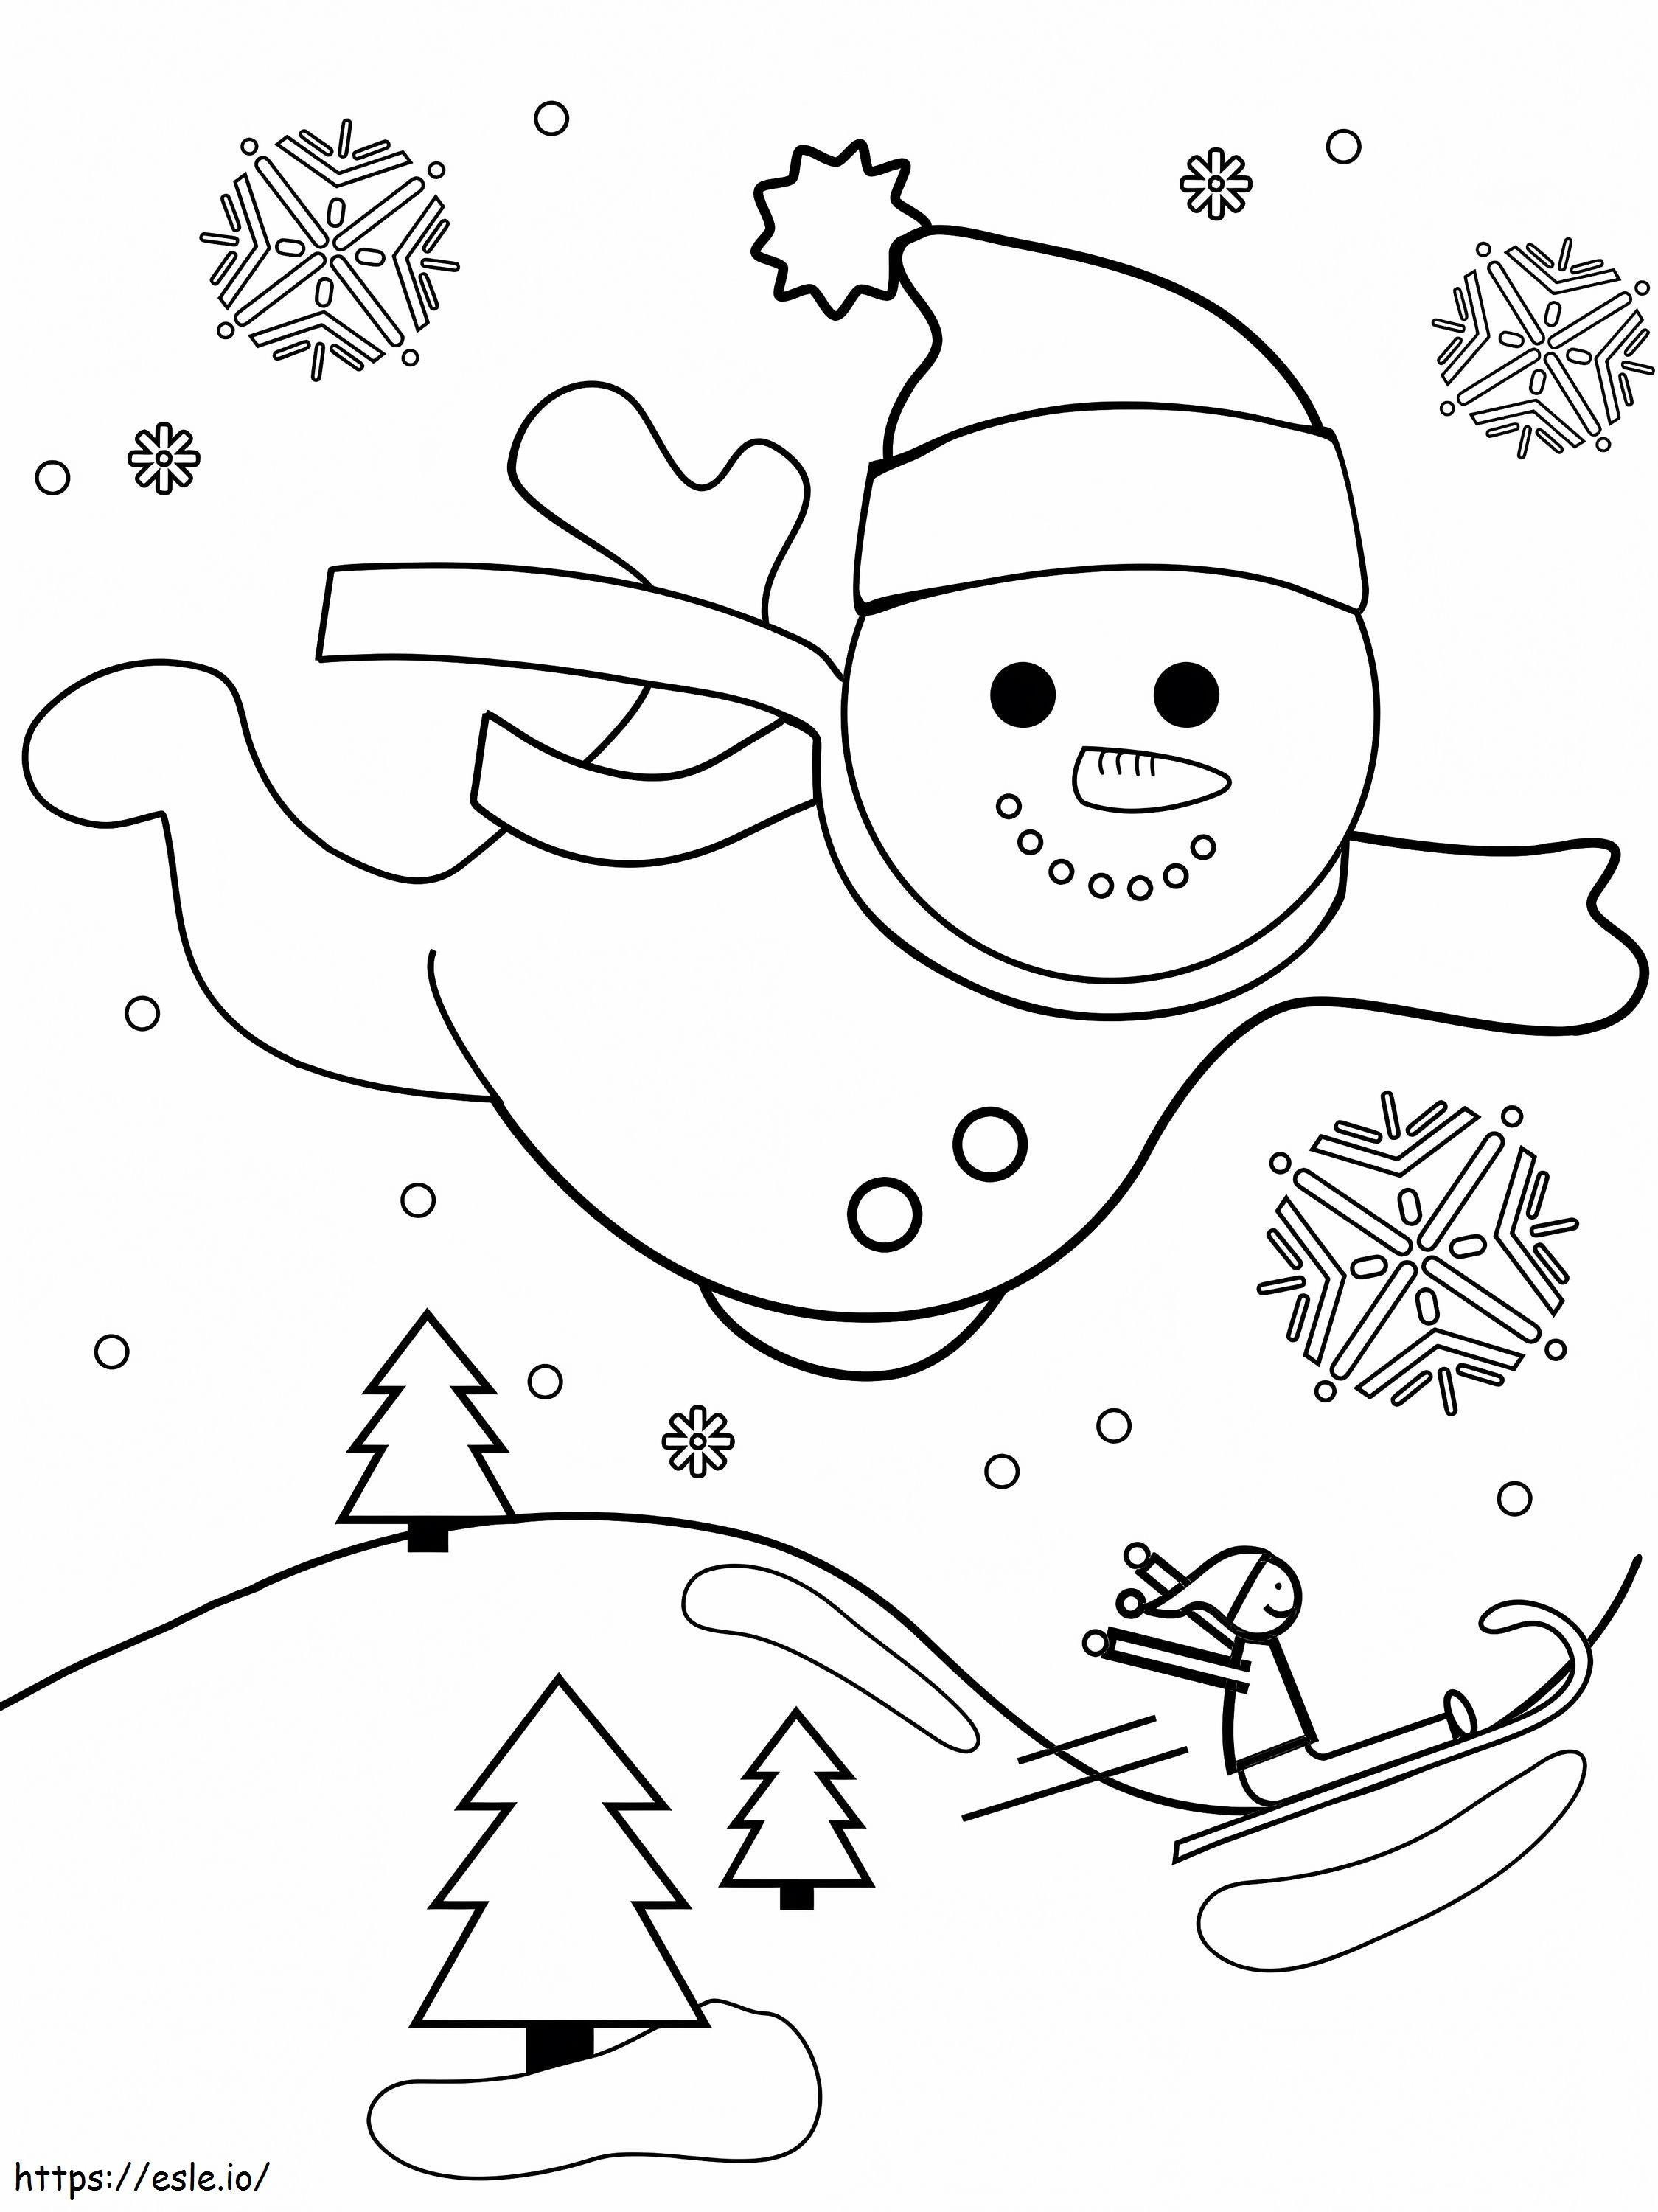 Snowman Flying Through The Air coloring page